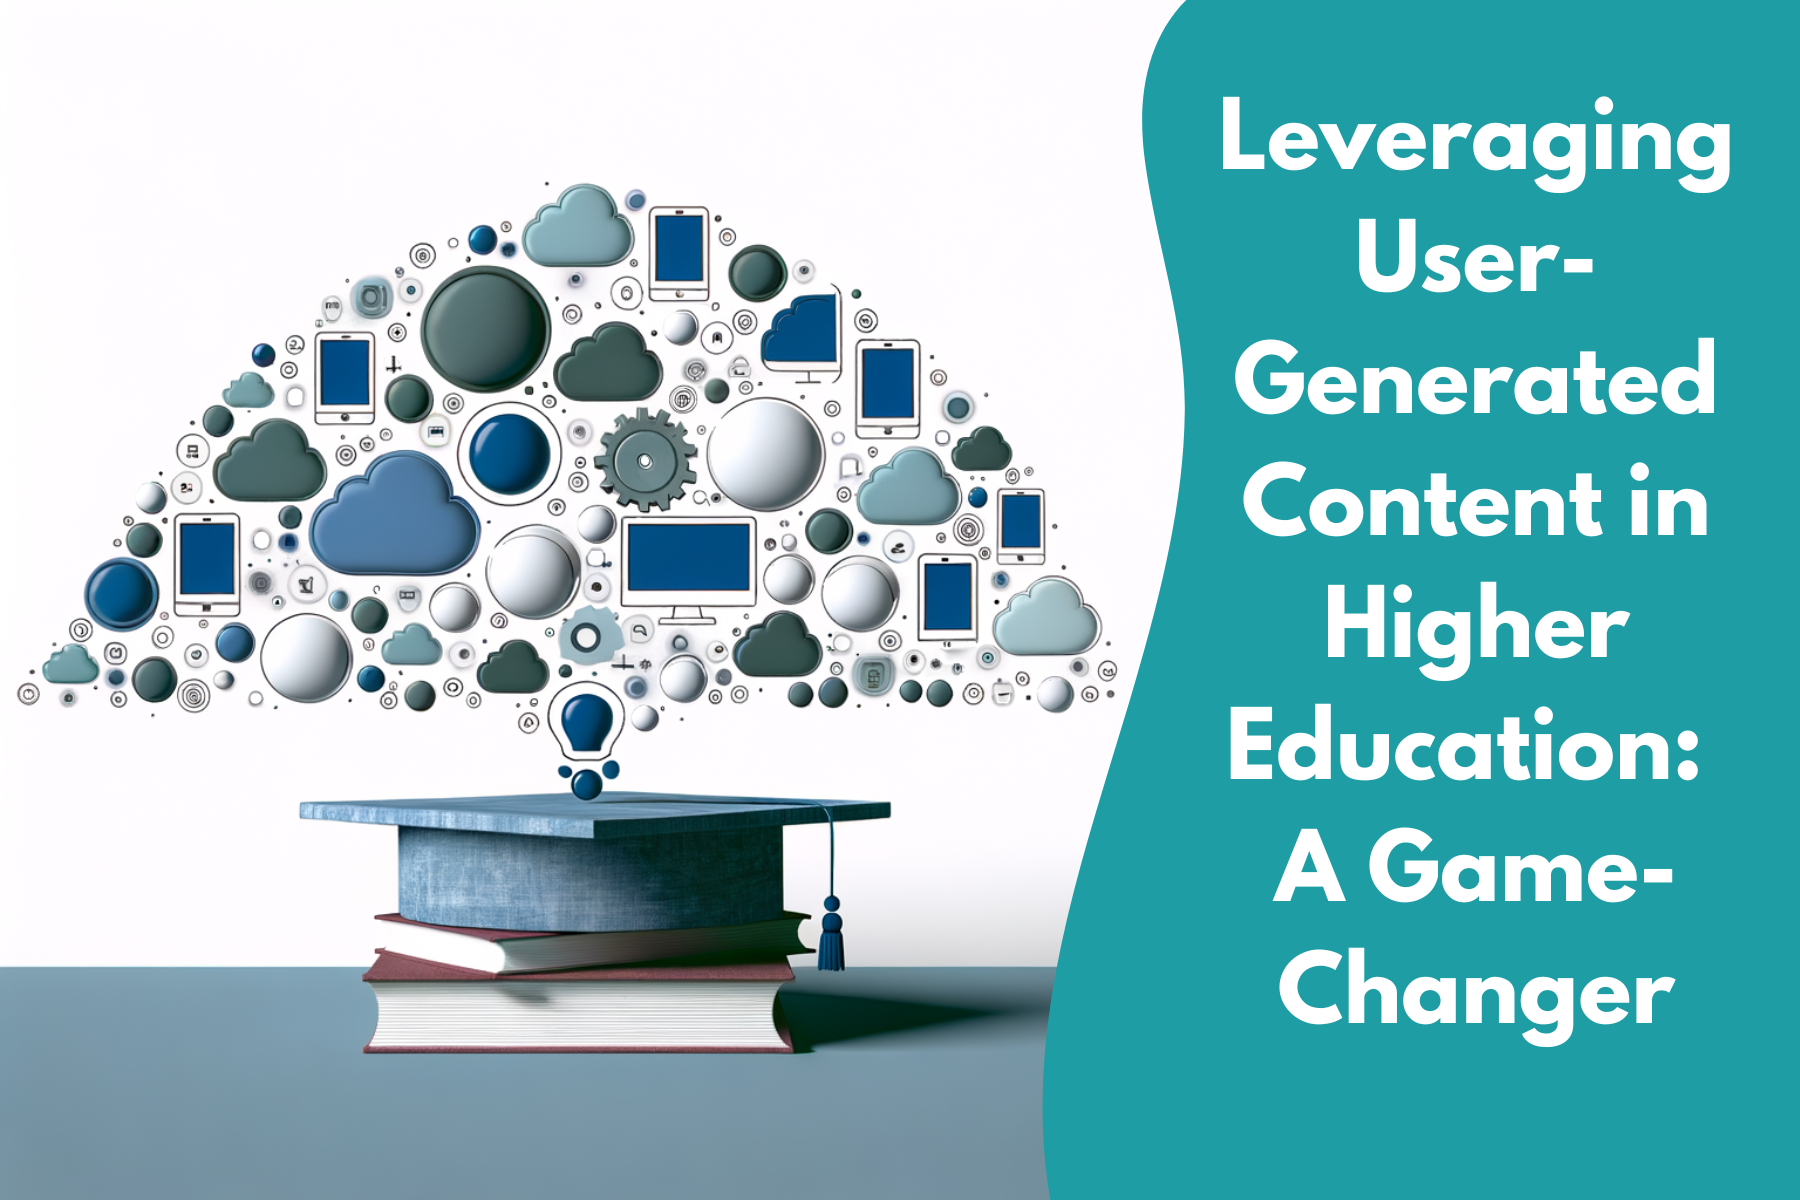 Leveraging User-Generated Content in Higher Education: A Game-Changer